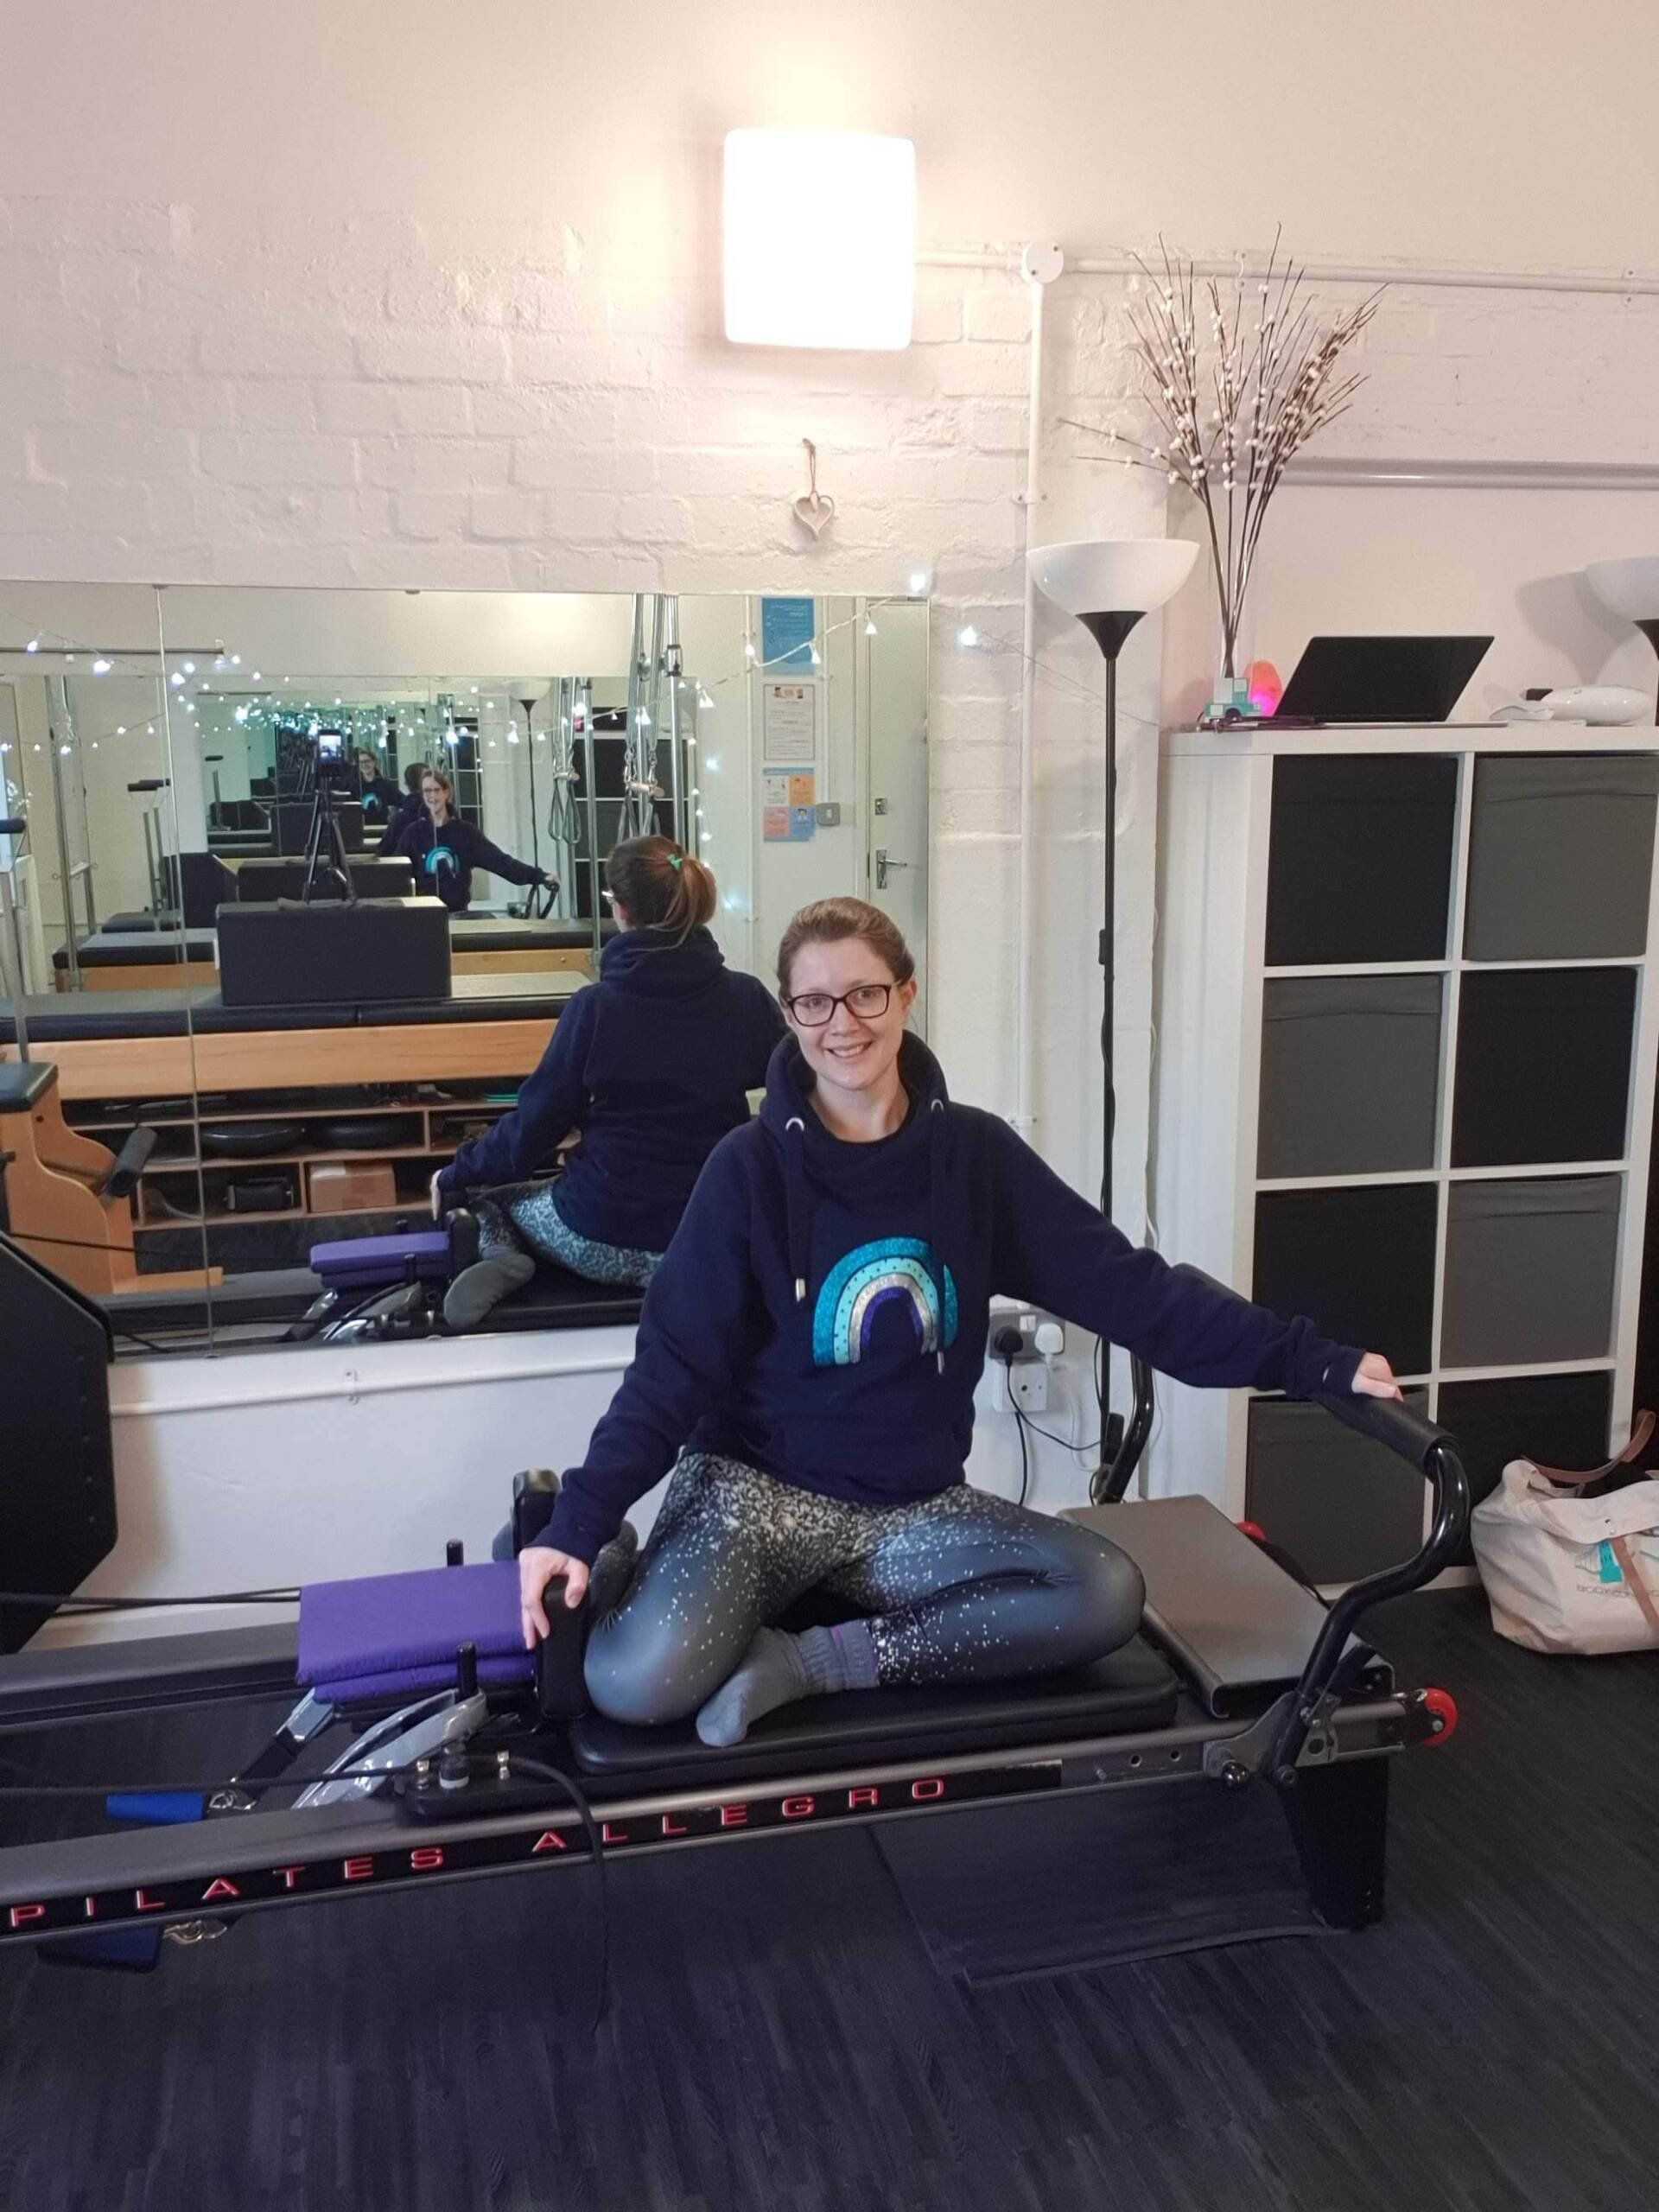 Pilates - weeks 4 and 5 update including news booking system going forward!